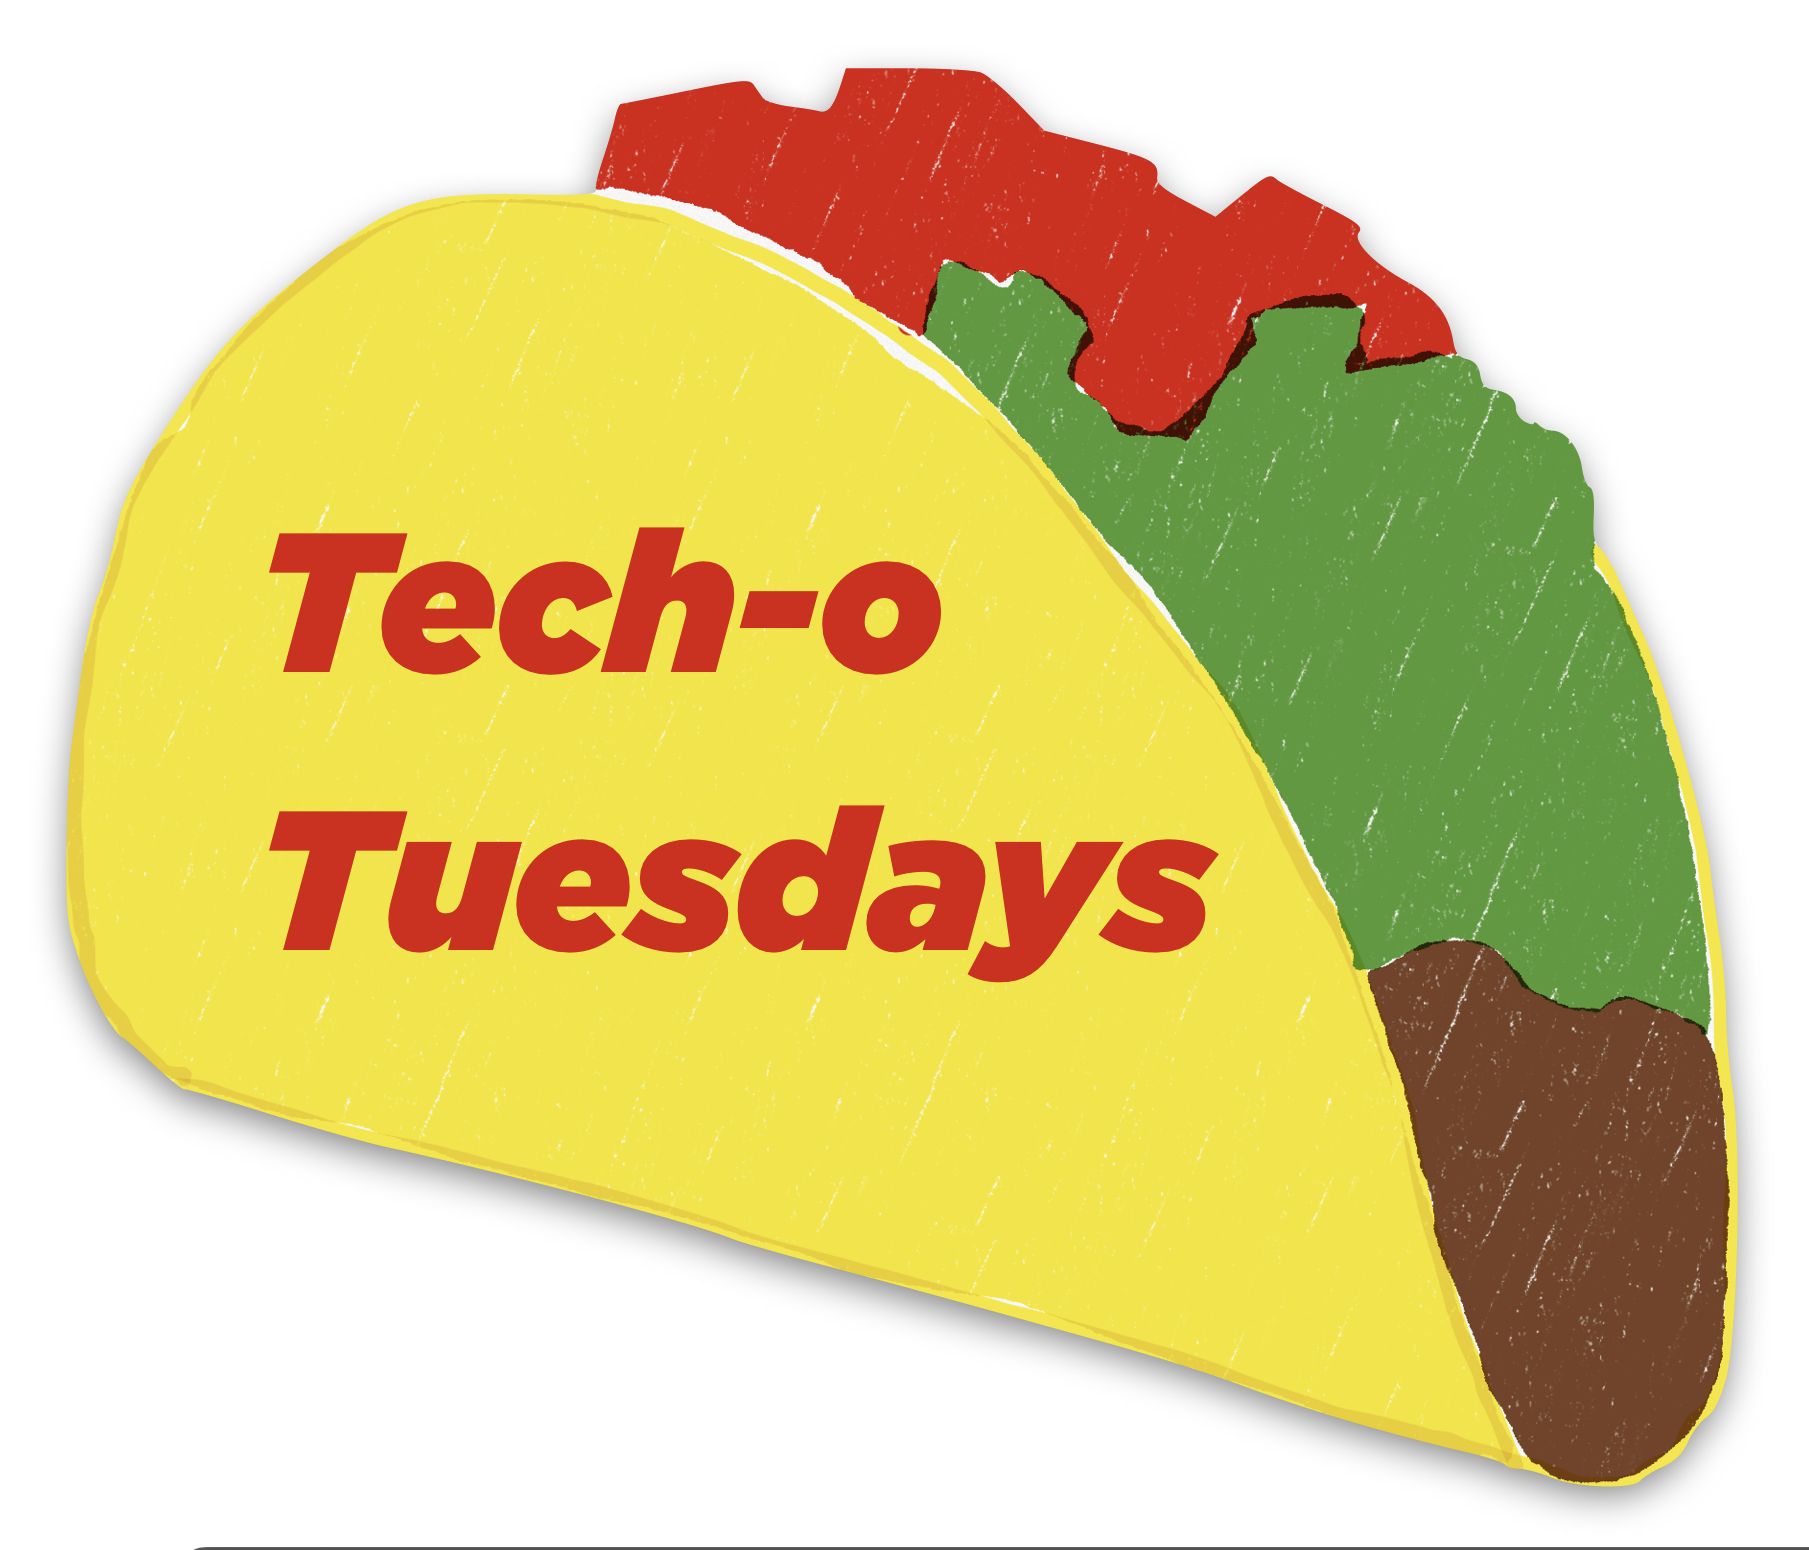 A painting of a taco with Techo-Tuesdays written on it.